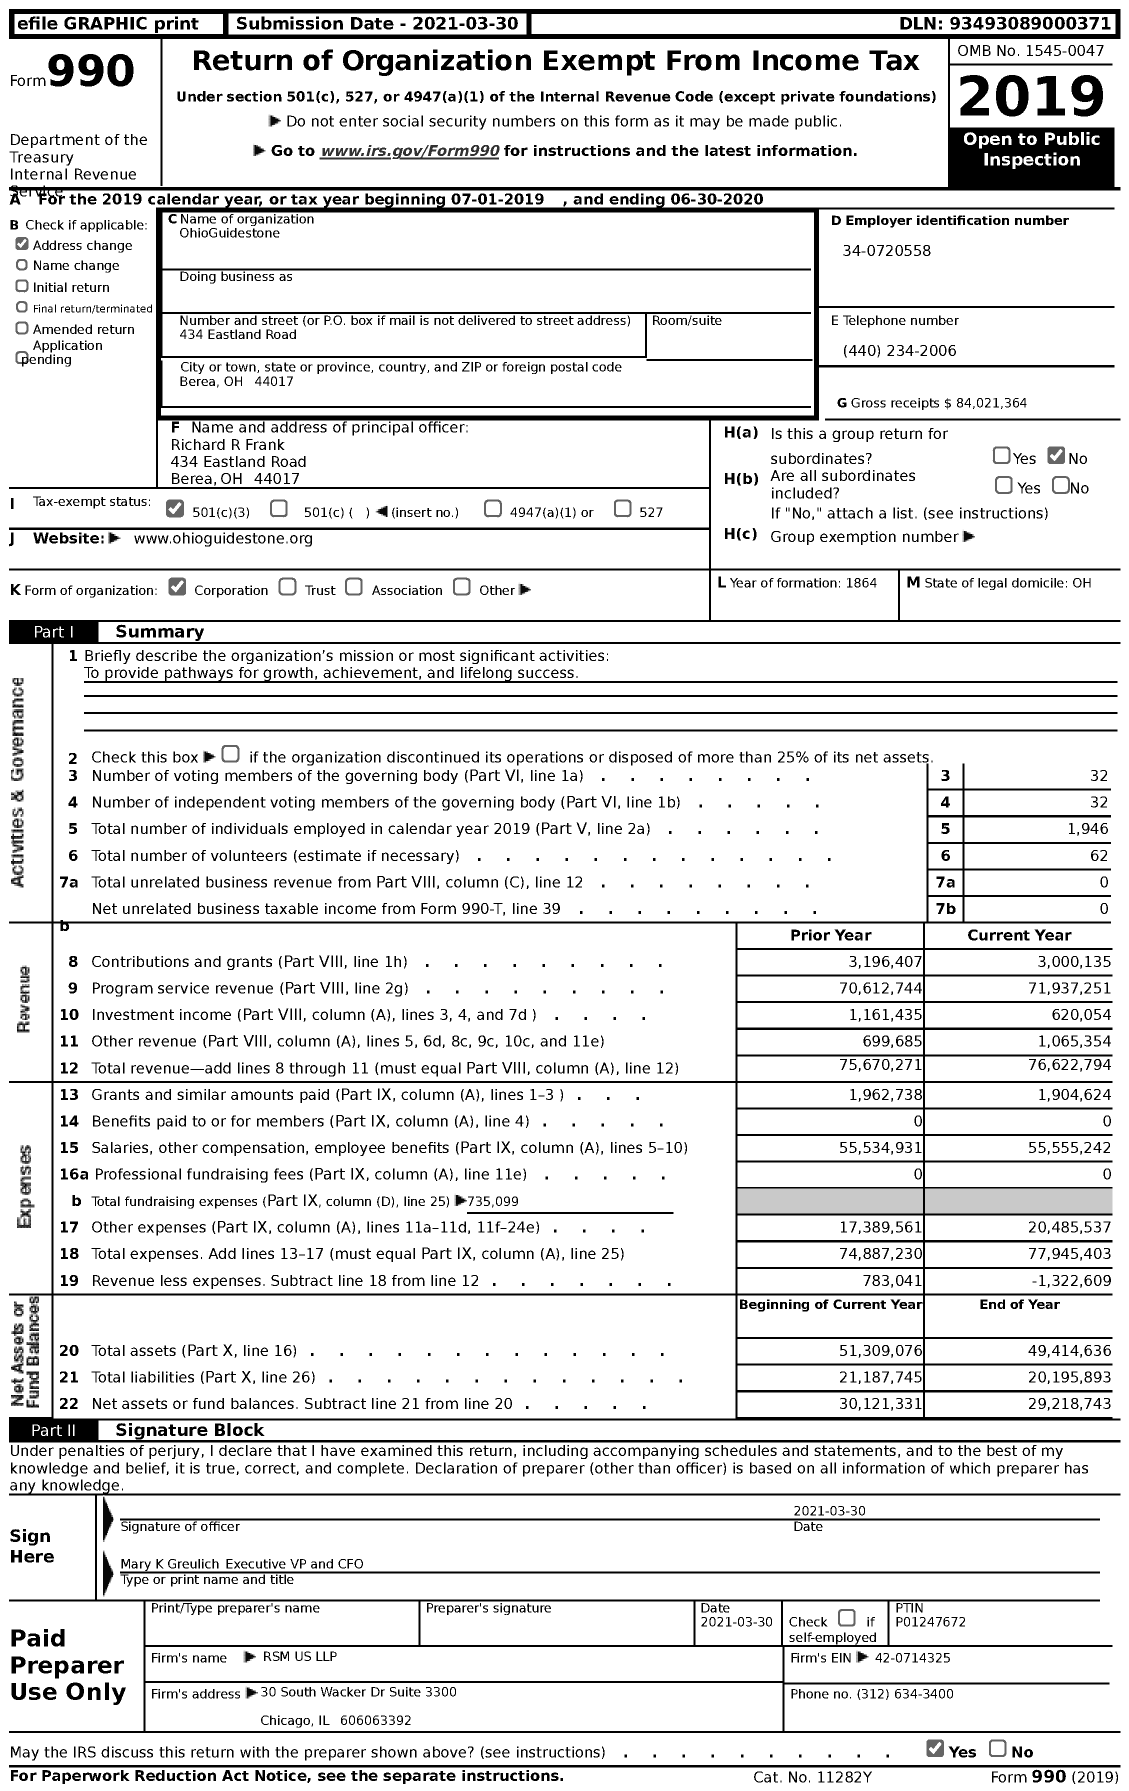 Image of first page of 2019 Form 990 for Ohioguidestone (OG)